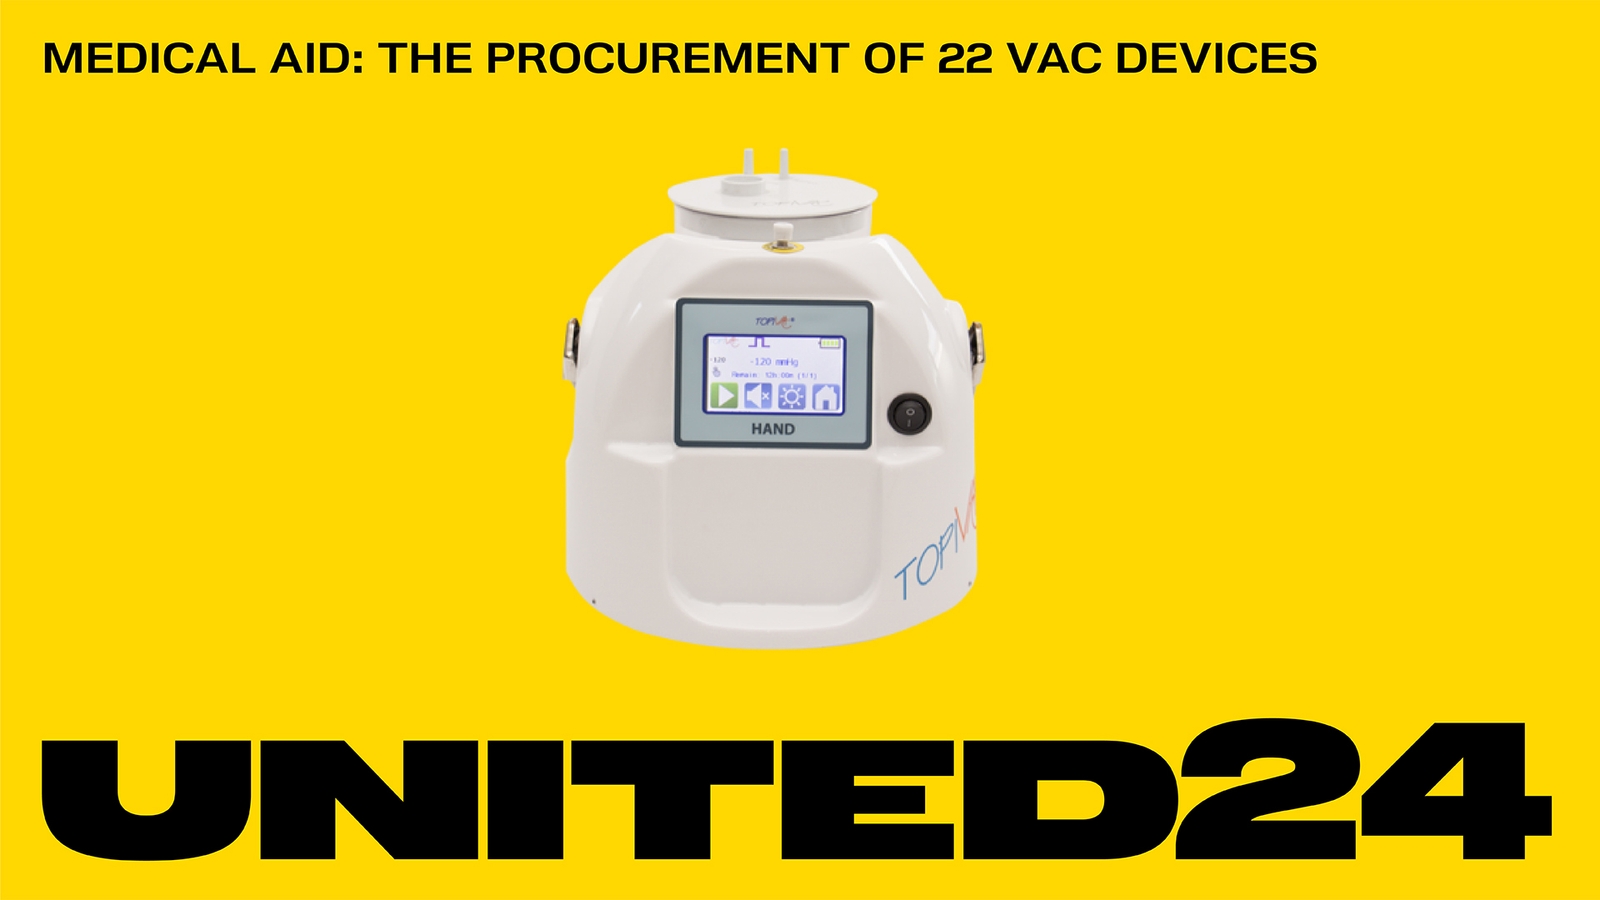 Medical Aid: The Procurement of 22 VAC devices